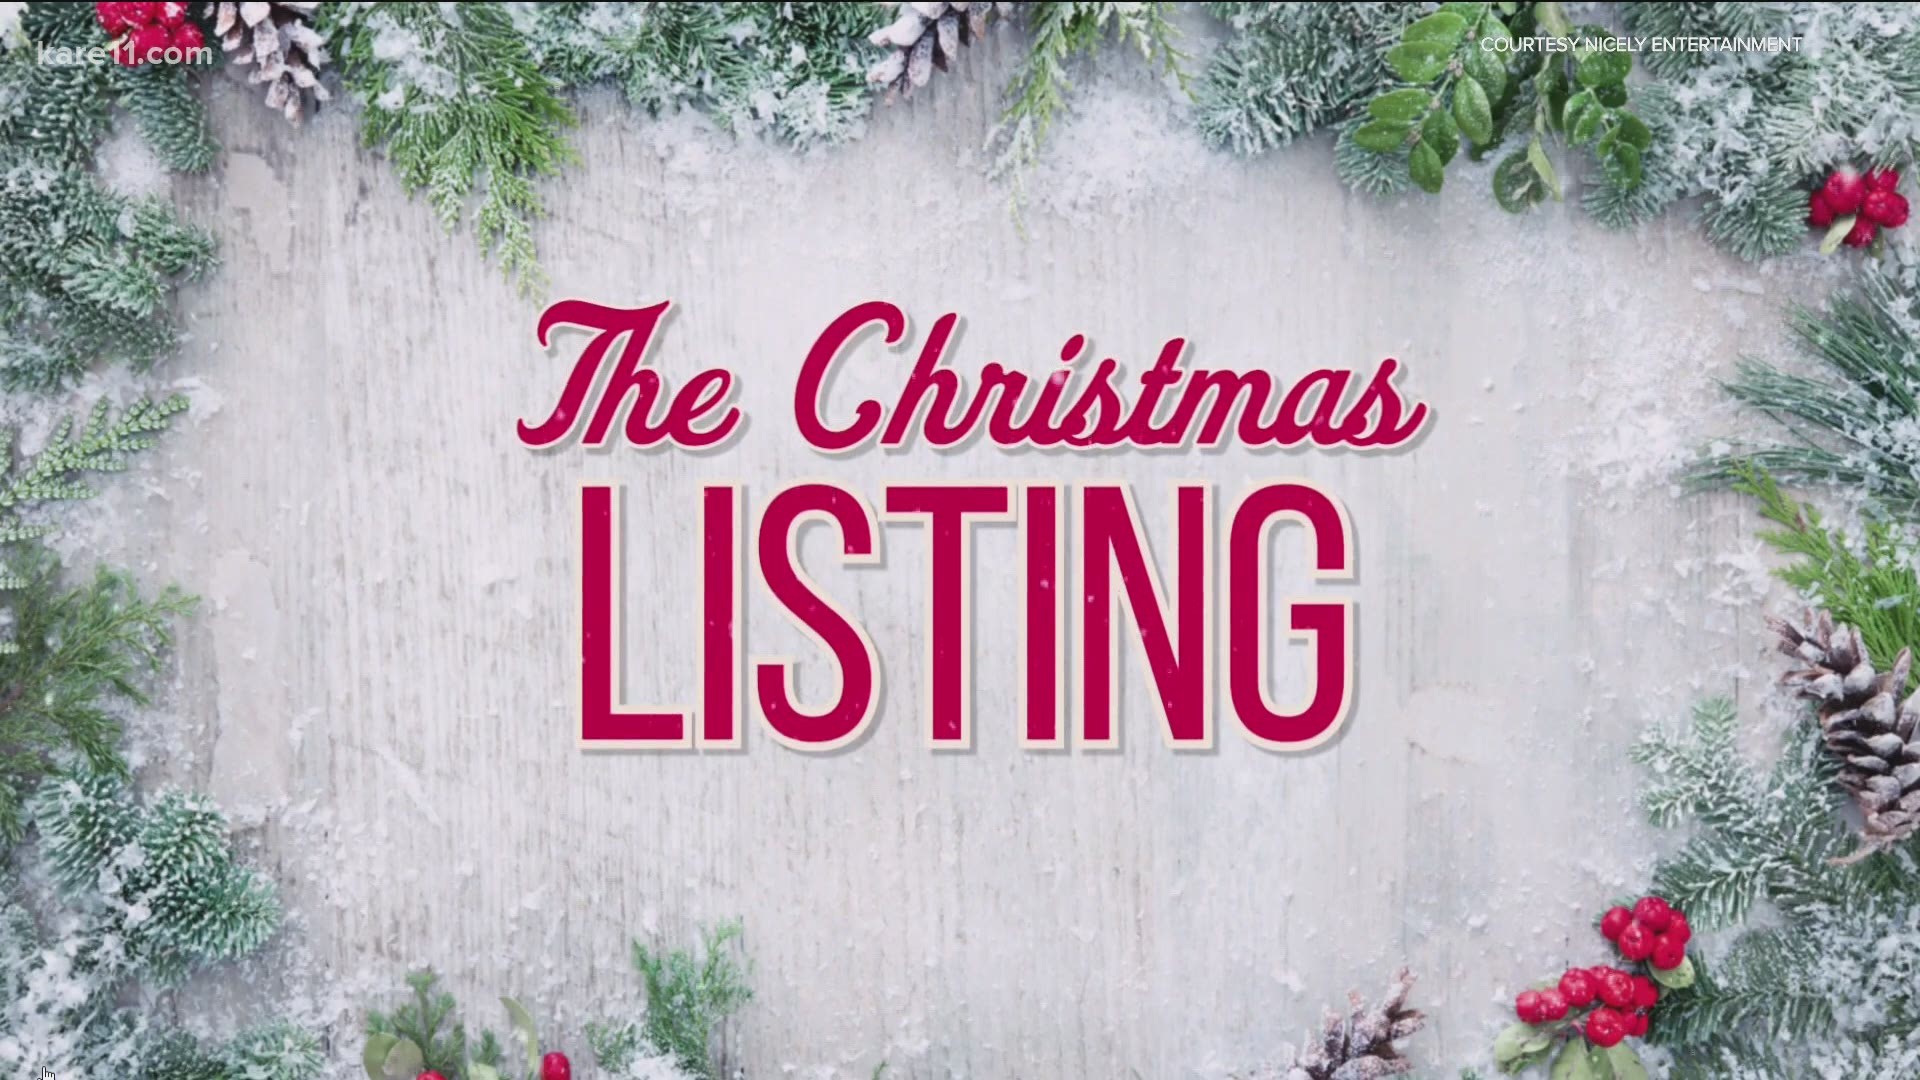 Lifetime is cueing up its holiday movie marathon. It features "The Christmas Listing," shot in Isanti and featuring local talent.